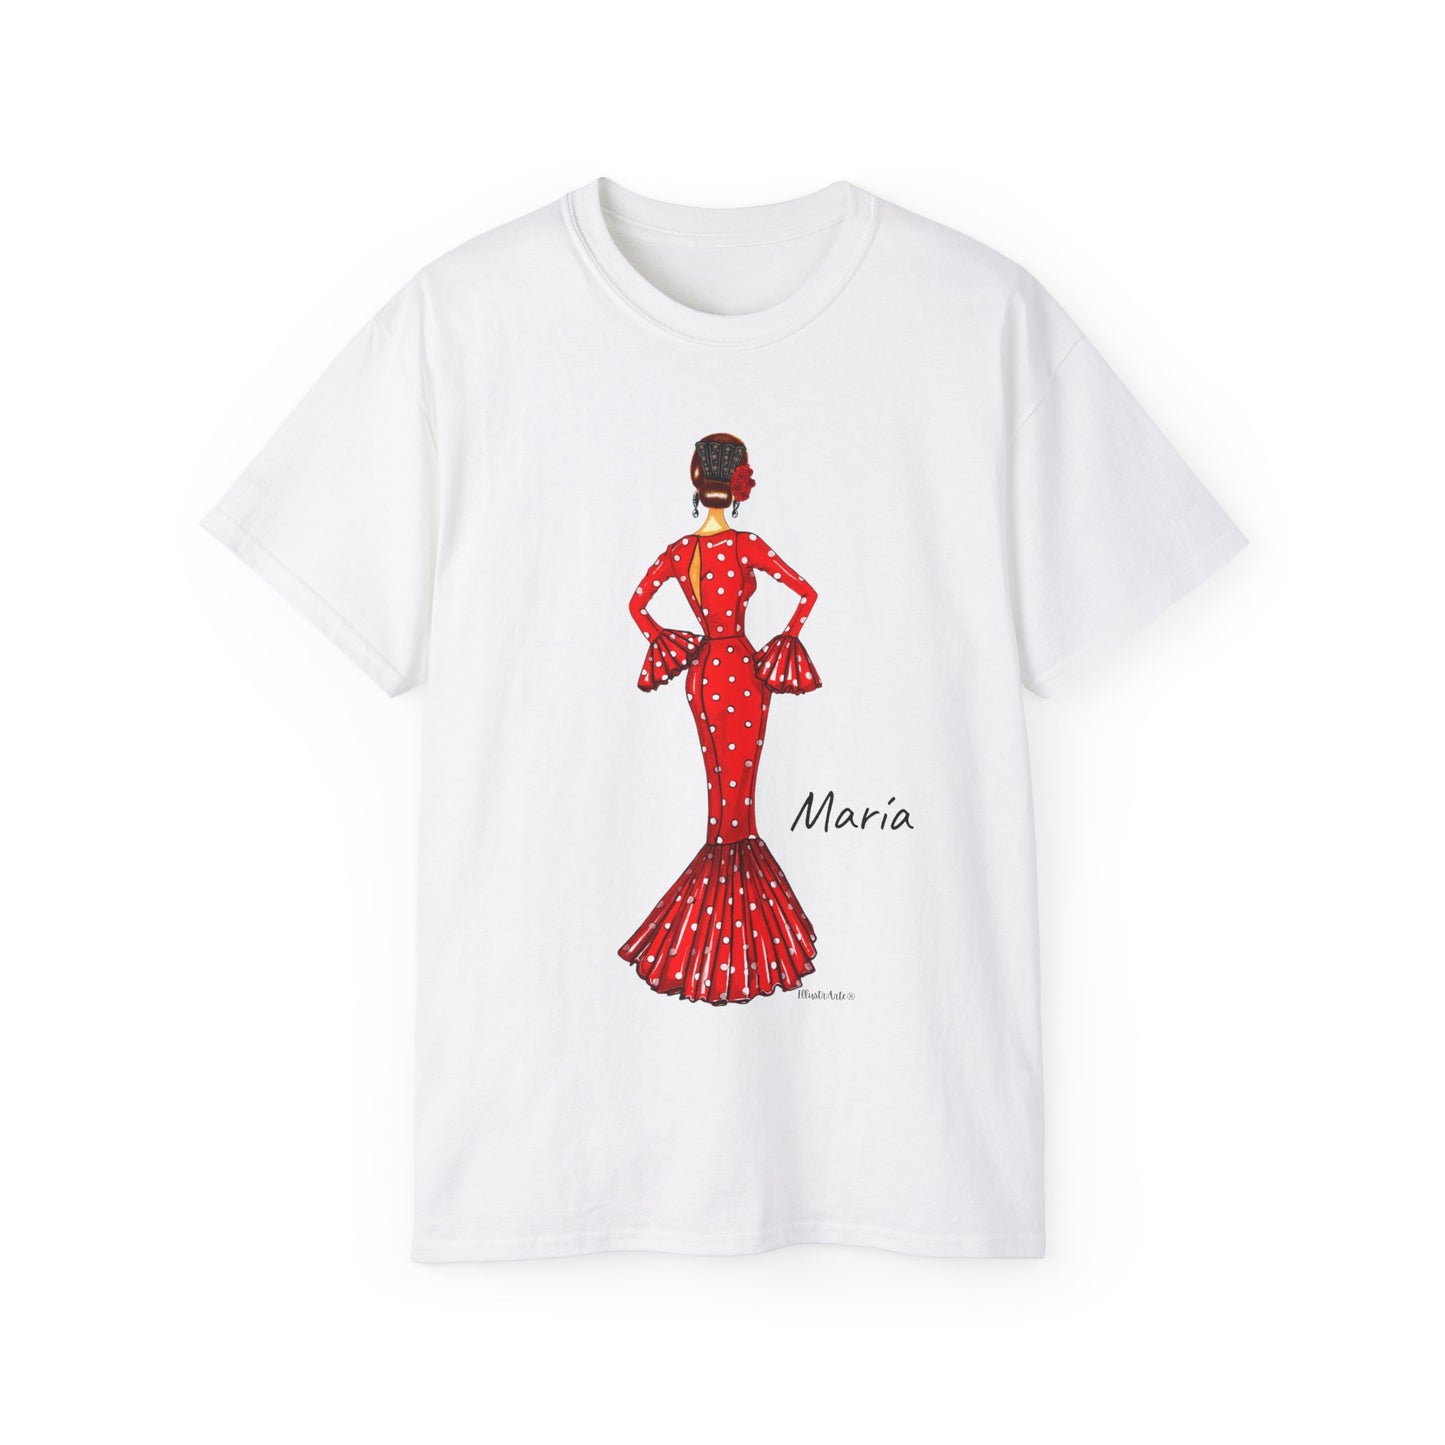 Limited Edition Seville Fair in Miami White classic customizable tee